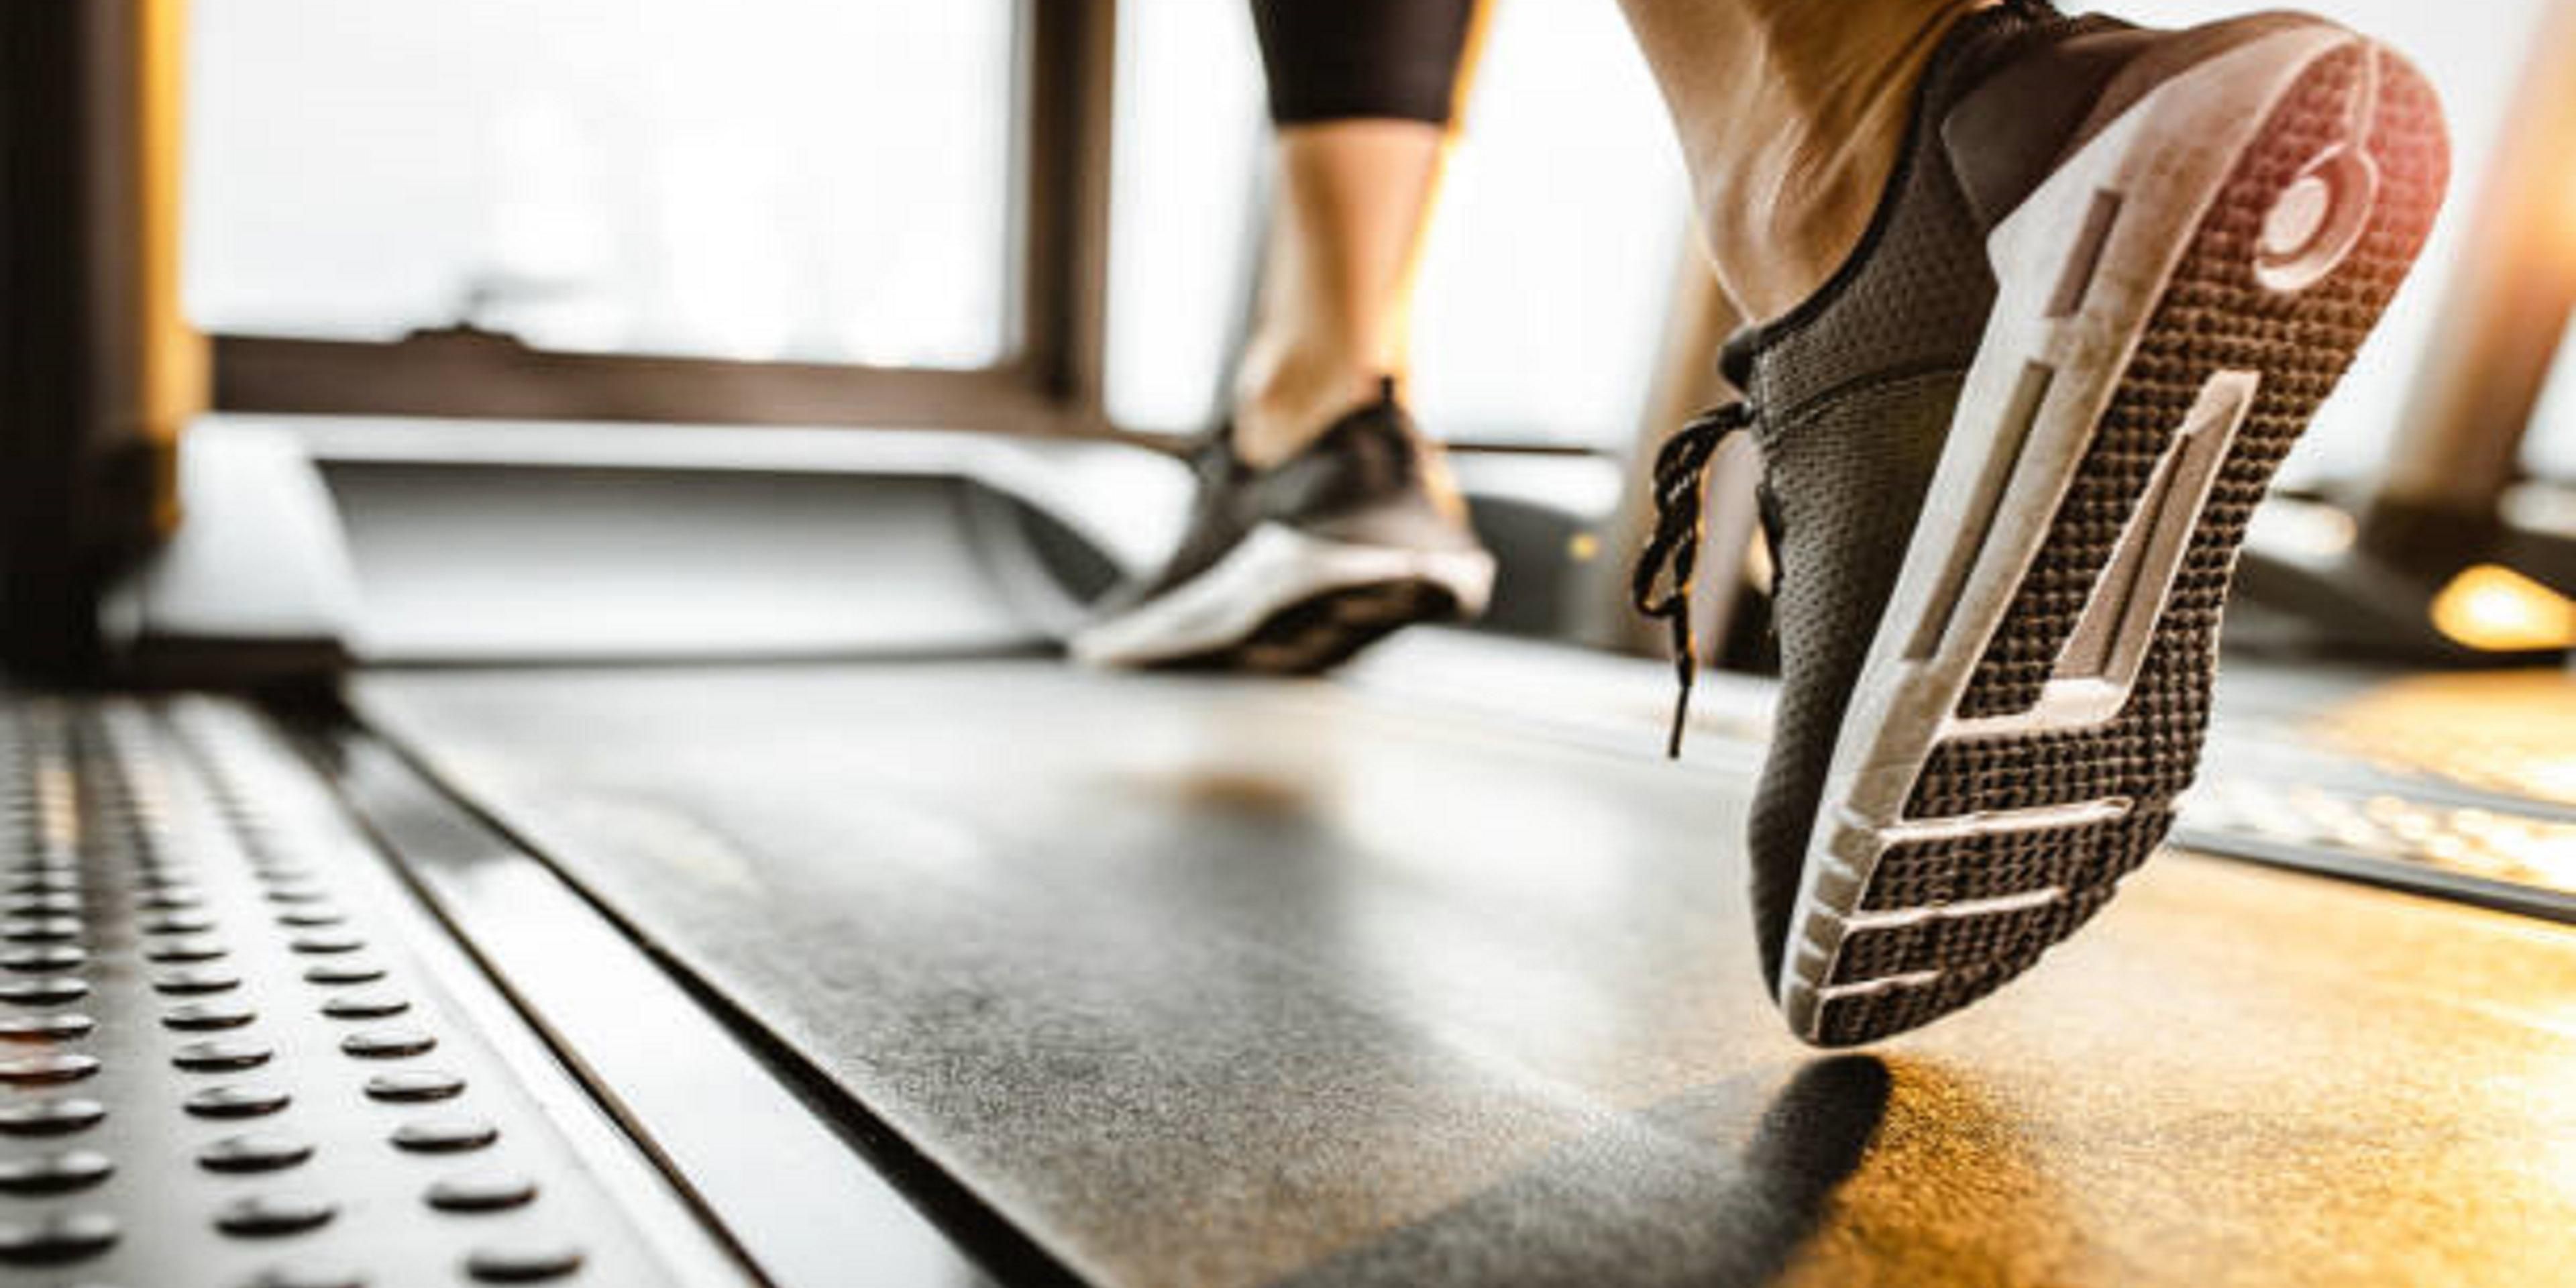 Get your sweat on in our complimentary, fully equipped fitness center with Treadmills, Ellipticals, a Spin Bike, Rower, and Free Weights. Open 24 hours.